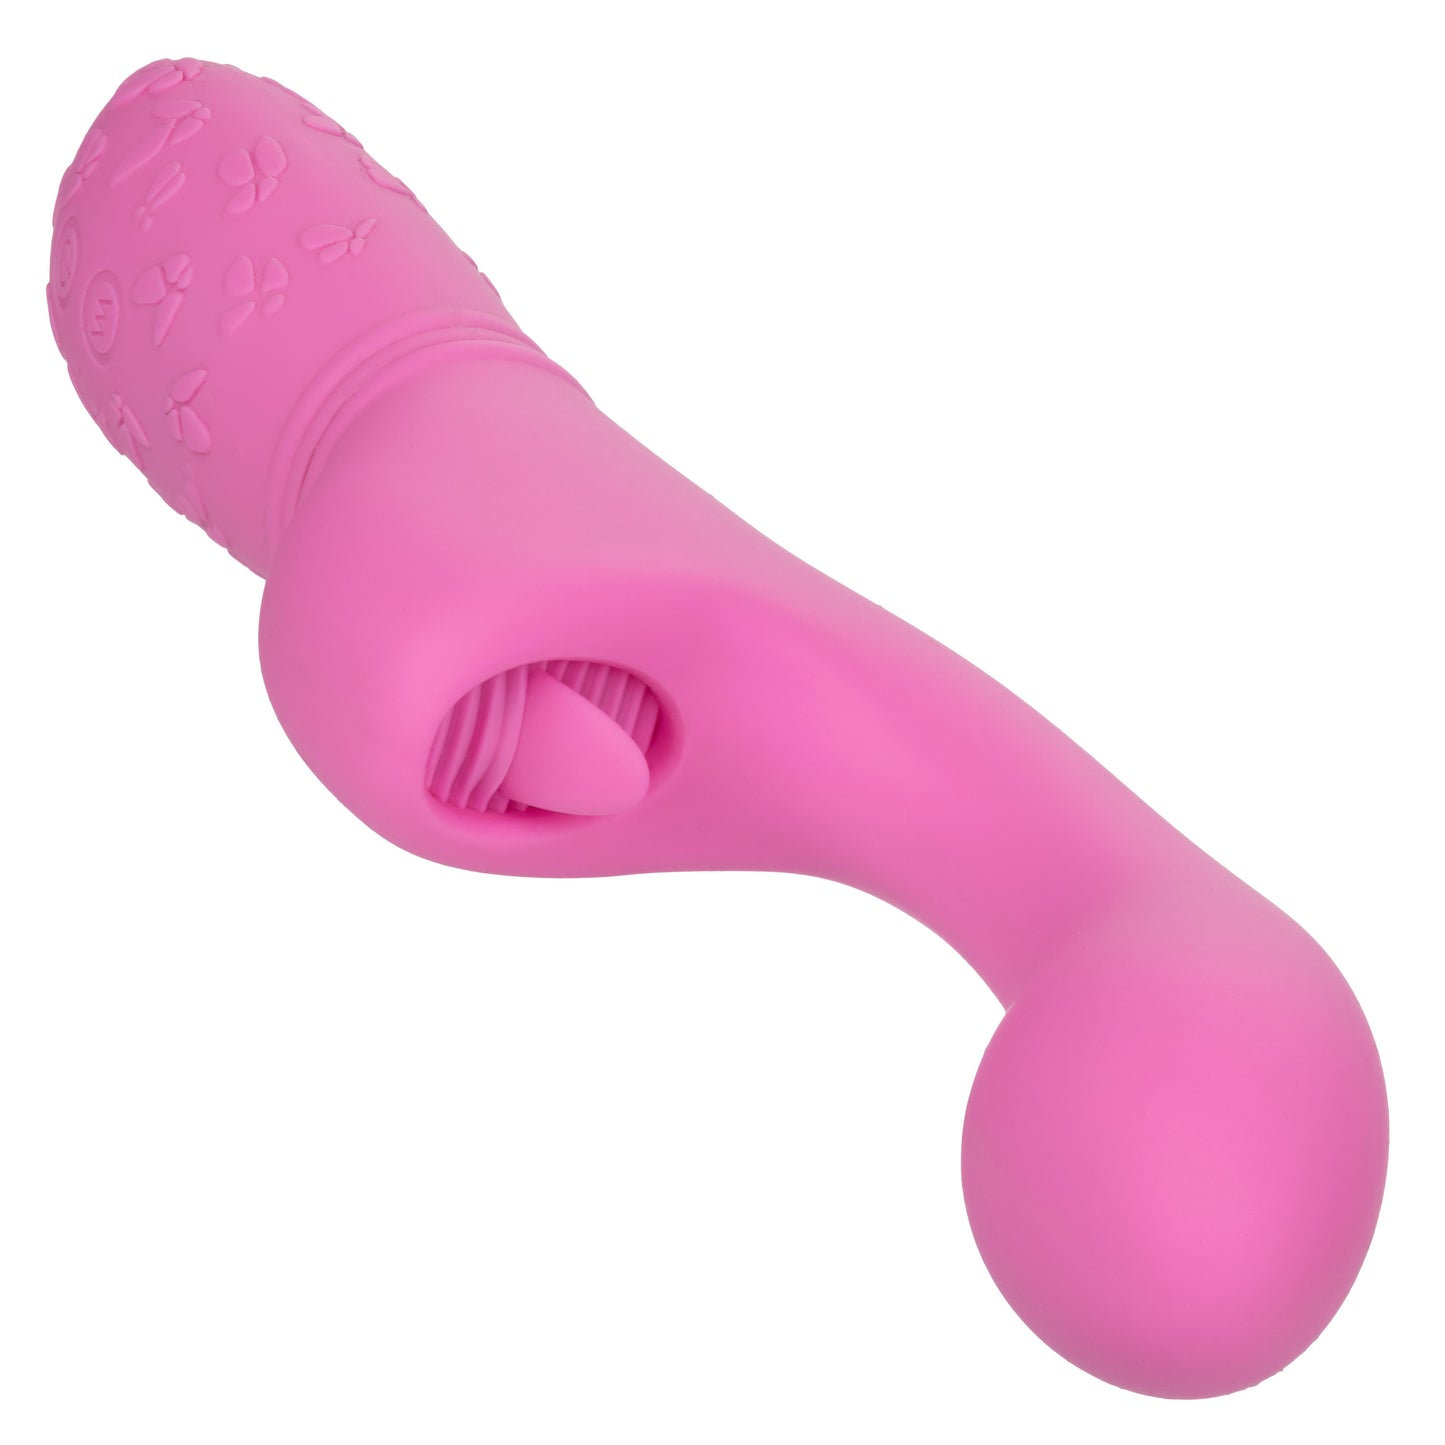 Rechargeable Butterfly Kiss Flicker - Pink